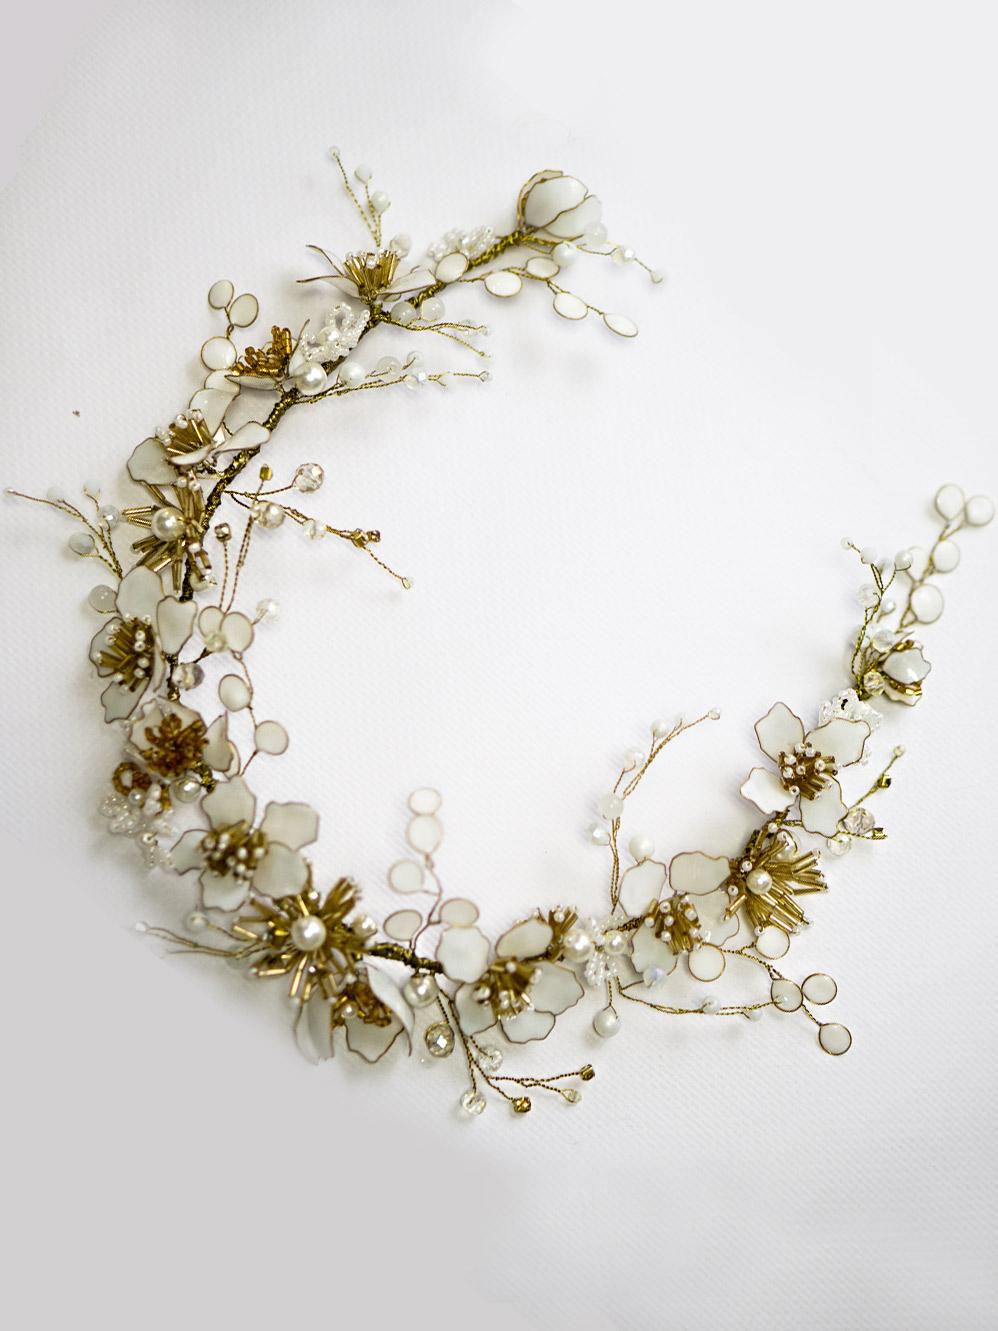 Close-up of a lush white flower hair vine with gold accents, perfect for bridal hair accessories